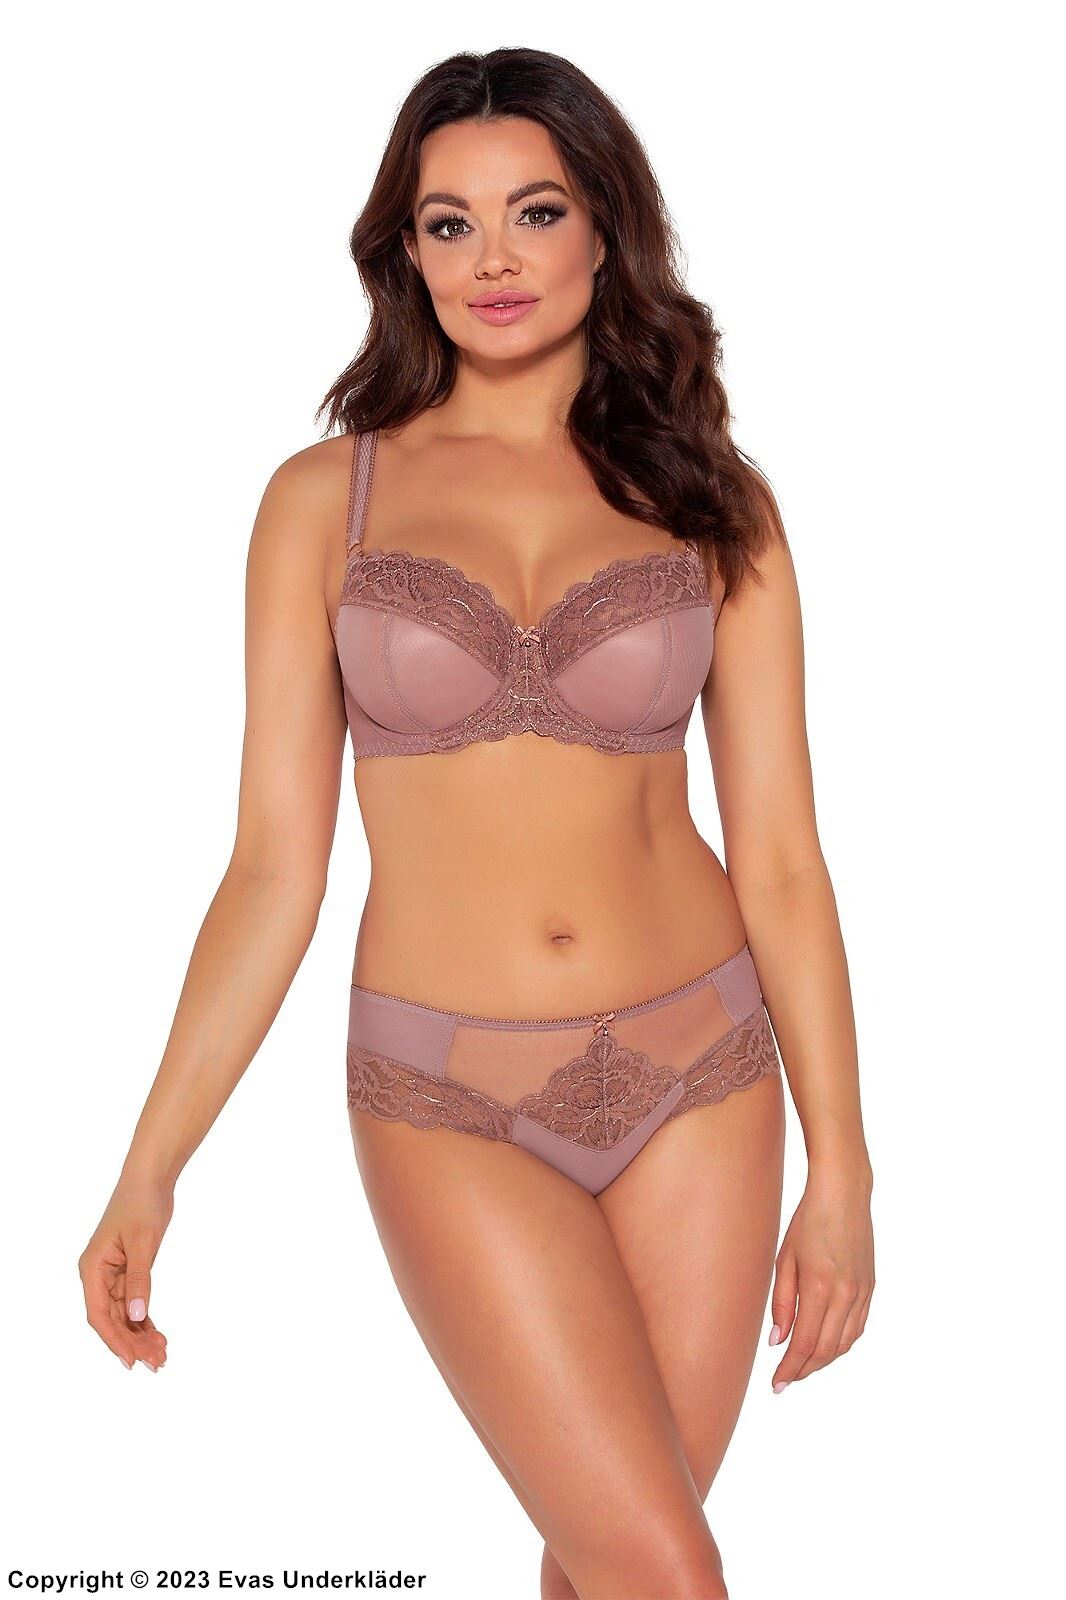 Soft cup bra, lace trim, mesh inlay, B to L-cup